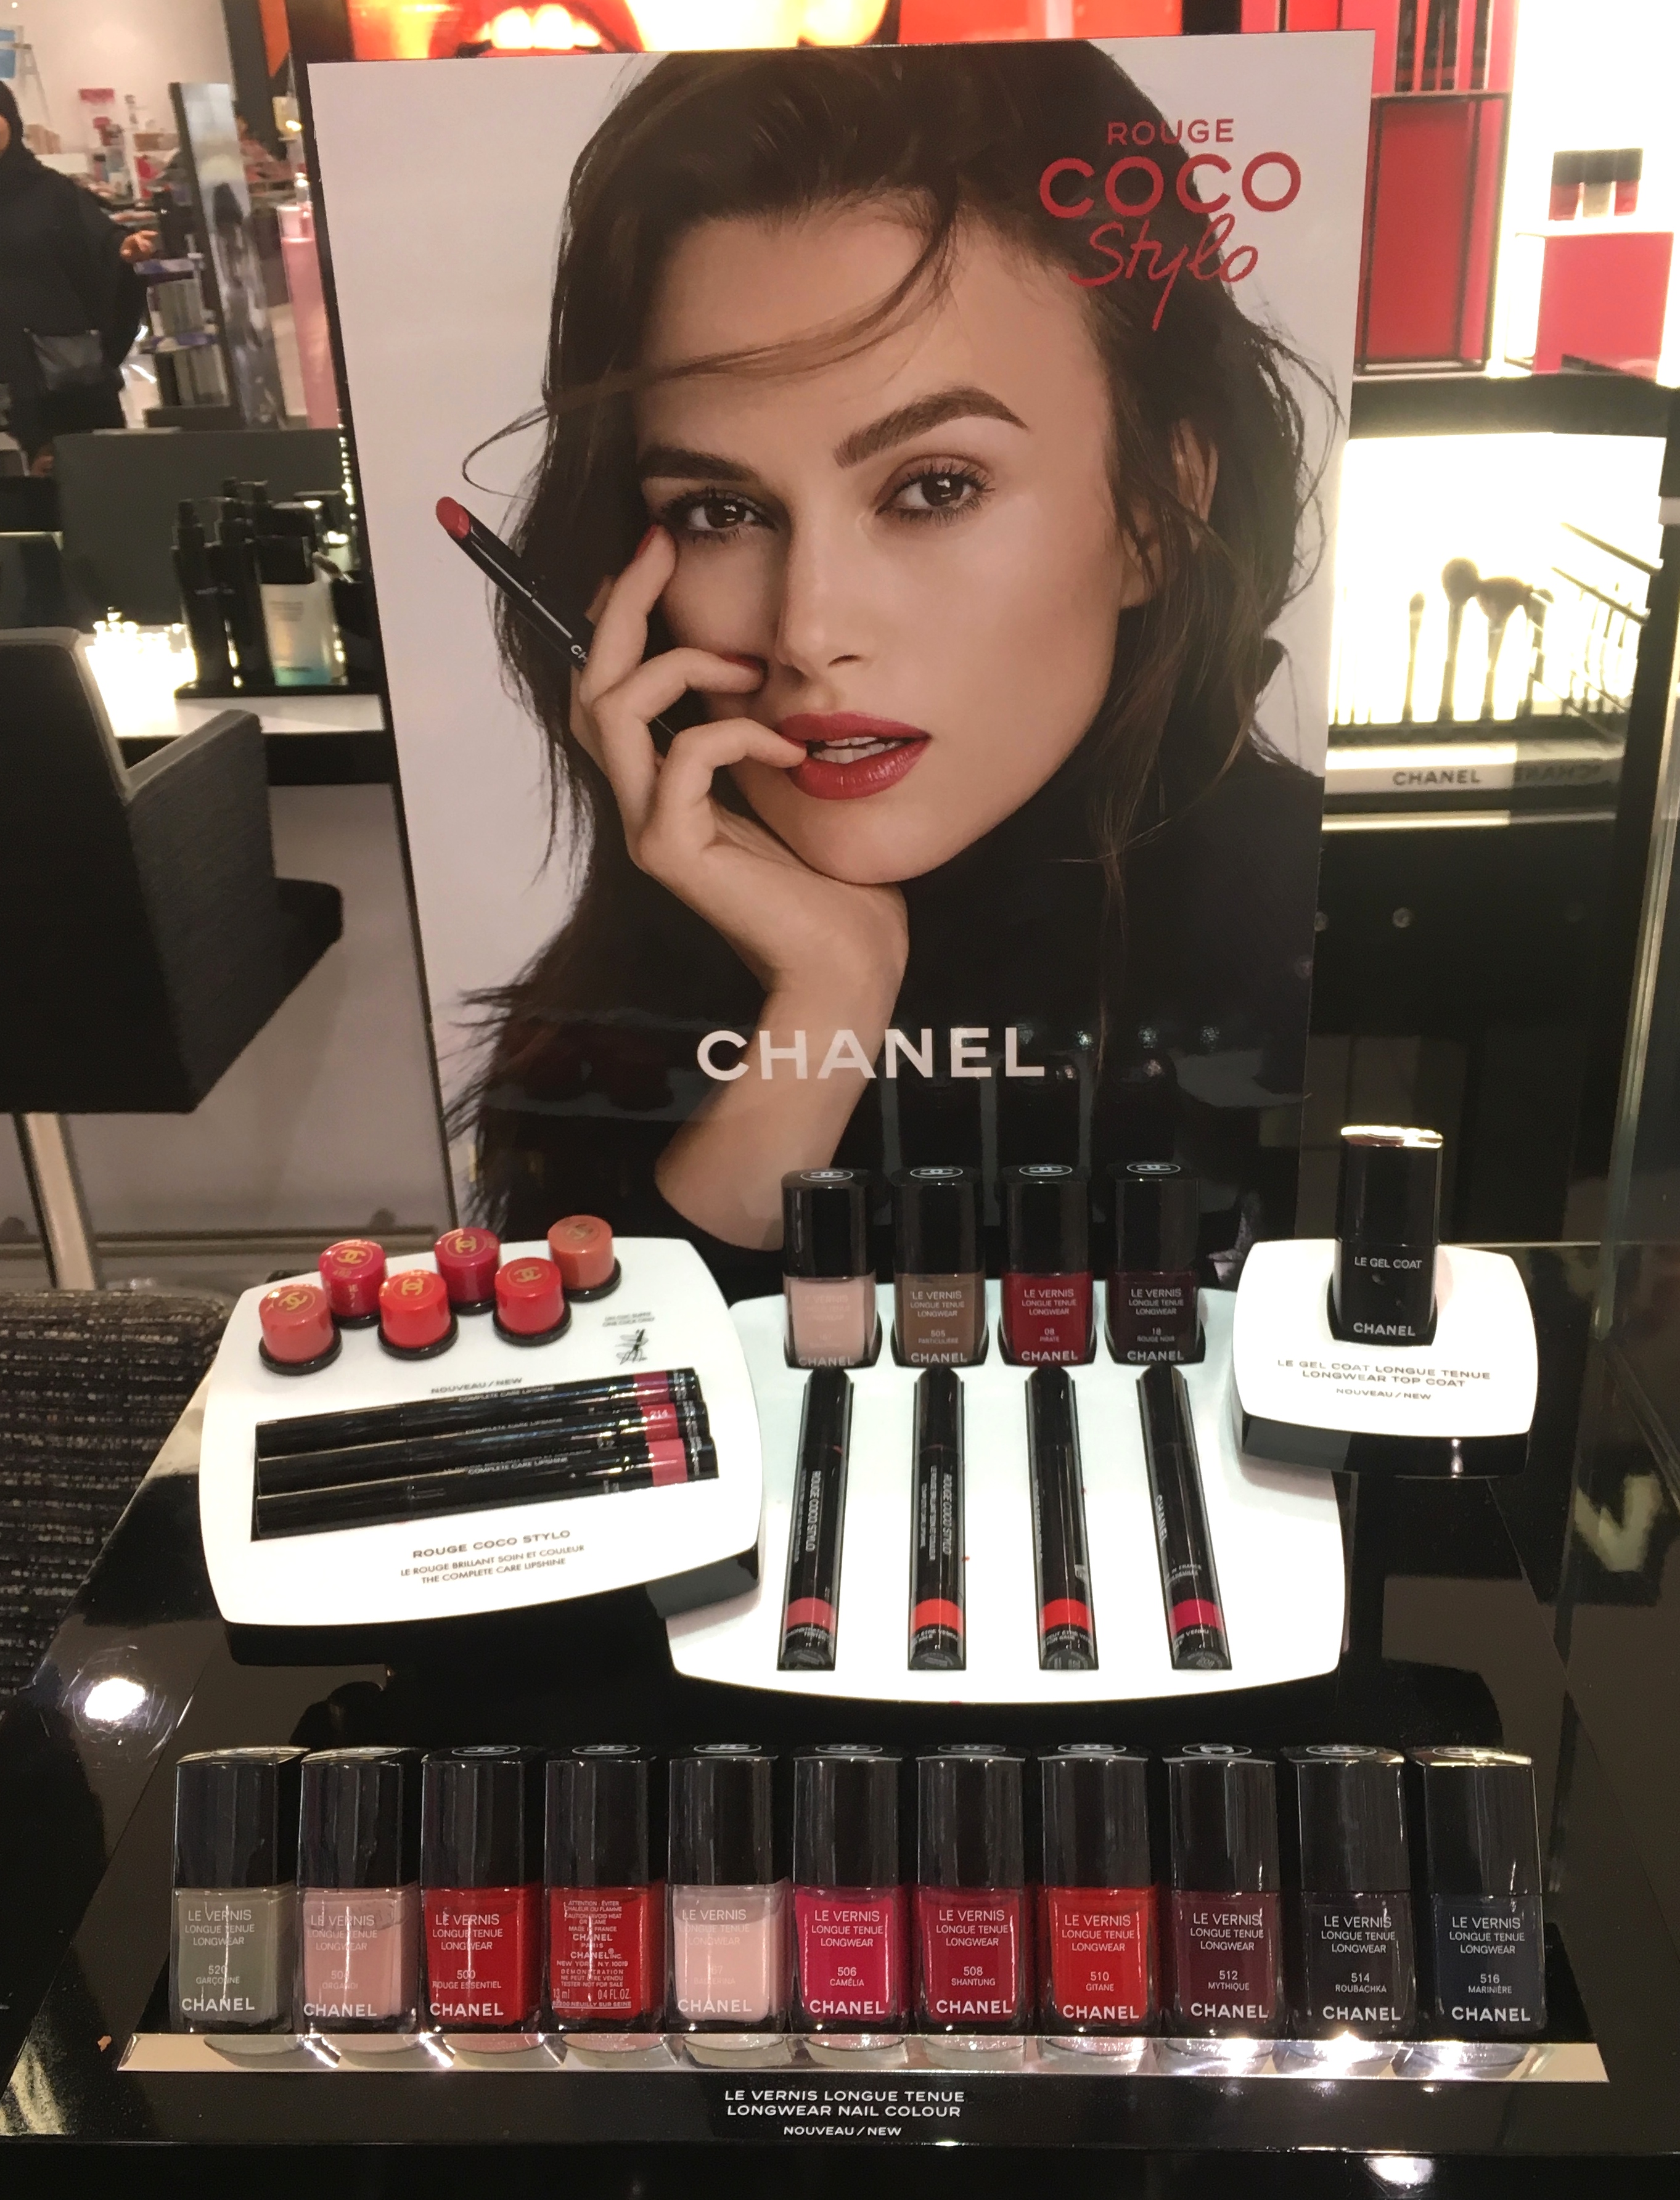 Chanel Rouge Coco stylo swatches – Follow Meesh | Beauty